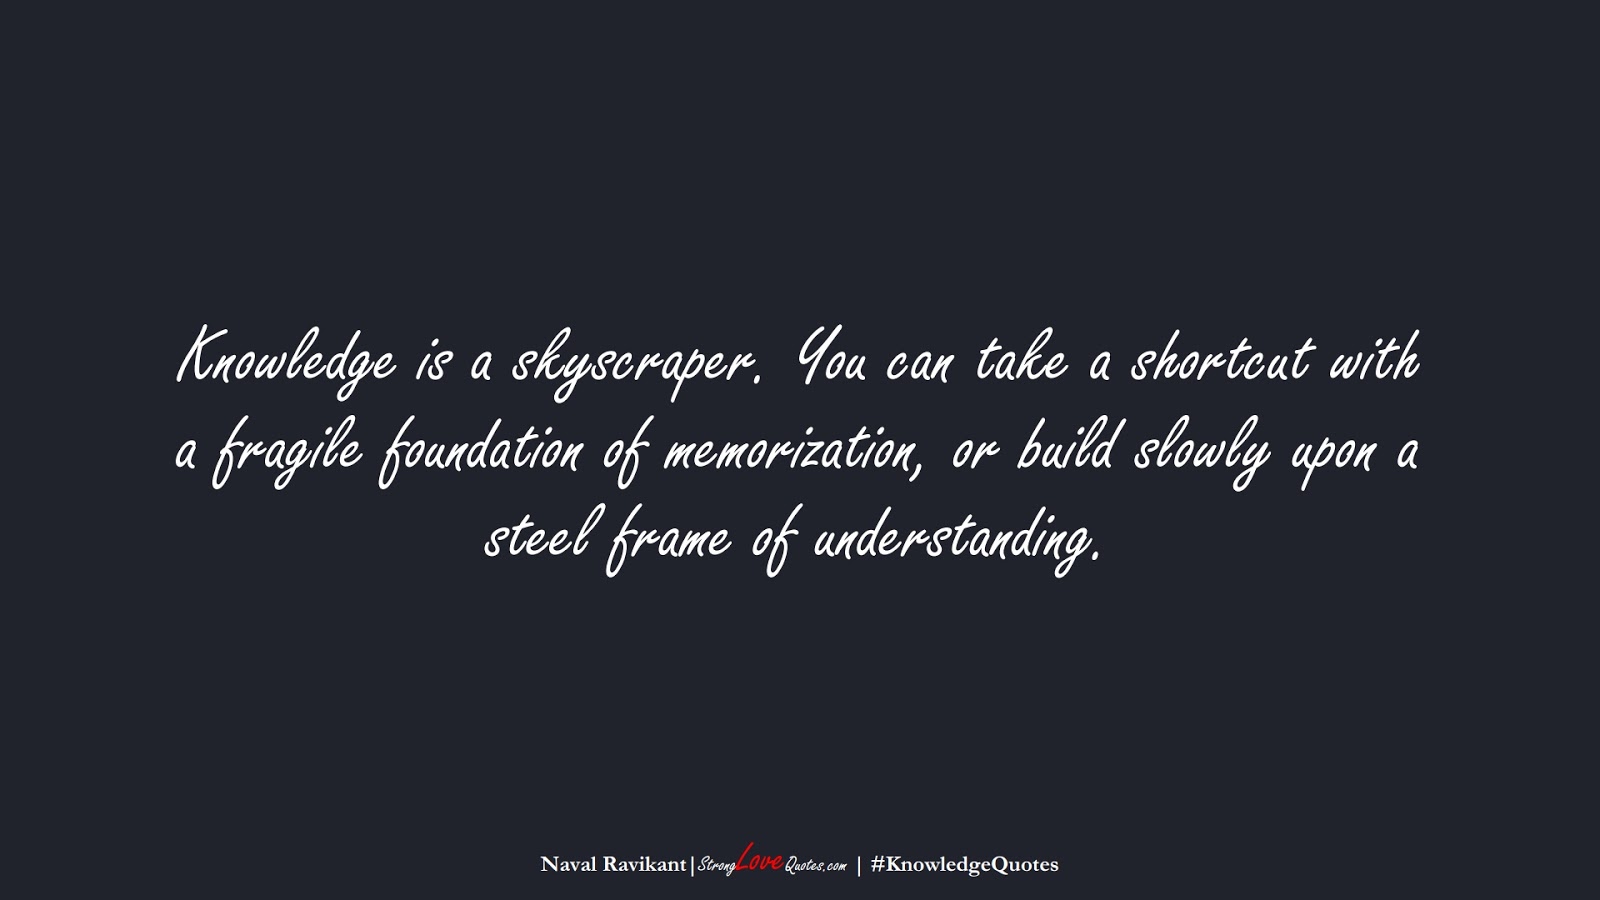 Knowledge is a skyscraper. You can take a shortcut with a fragile foundation of memorization, or build slowly upon a steel frame of understanding. (Naval Ravikant);  #KnowledgeQuotes